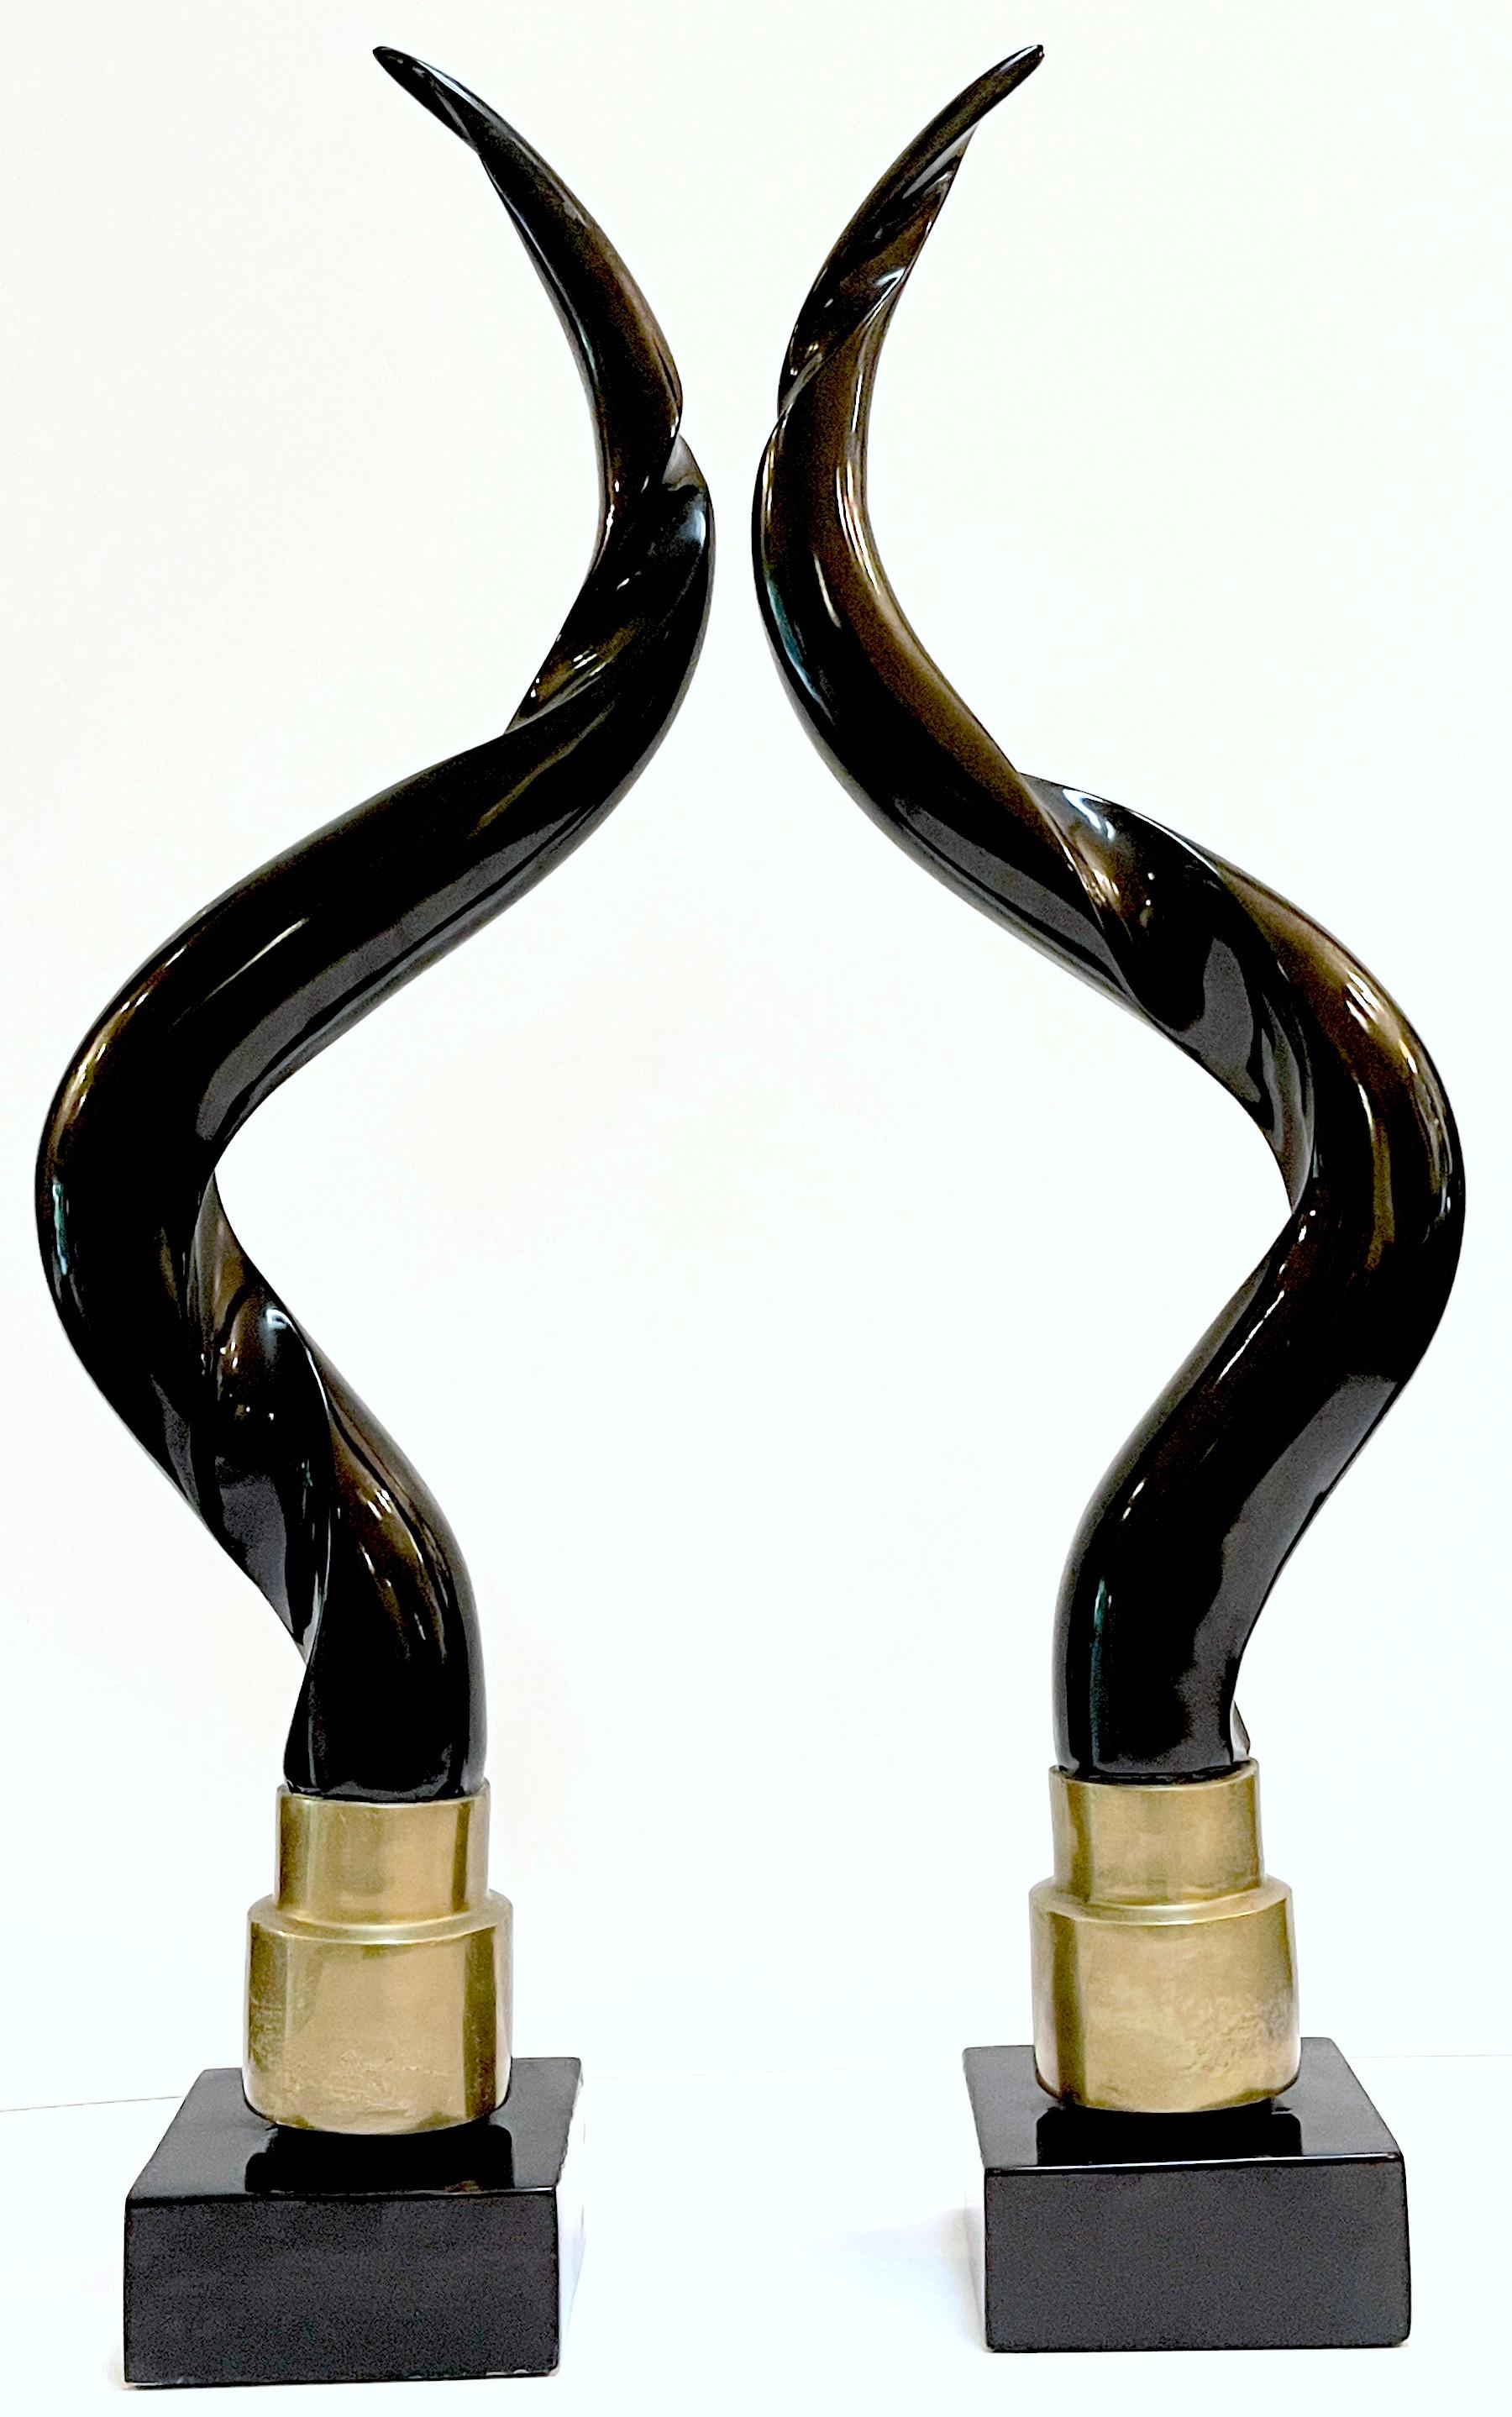 Pair of Brass and Chocolate Brown Lacquer Antelope Horns, Style Springer 
USA, circa 1980s

A striking pair of brass and chocolate brown lacquer antelope horns, embodying the distinctive style reminiscent of Karl Springer and originating from the